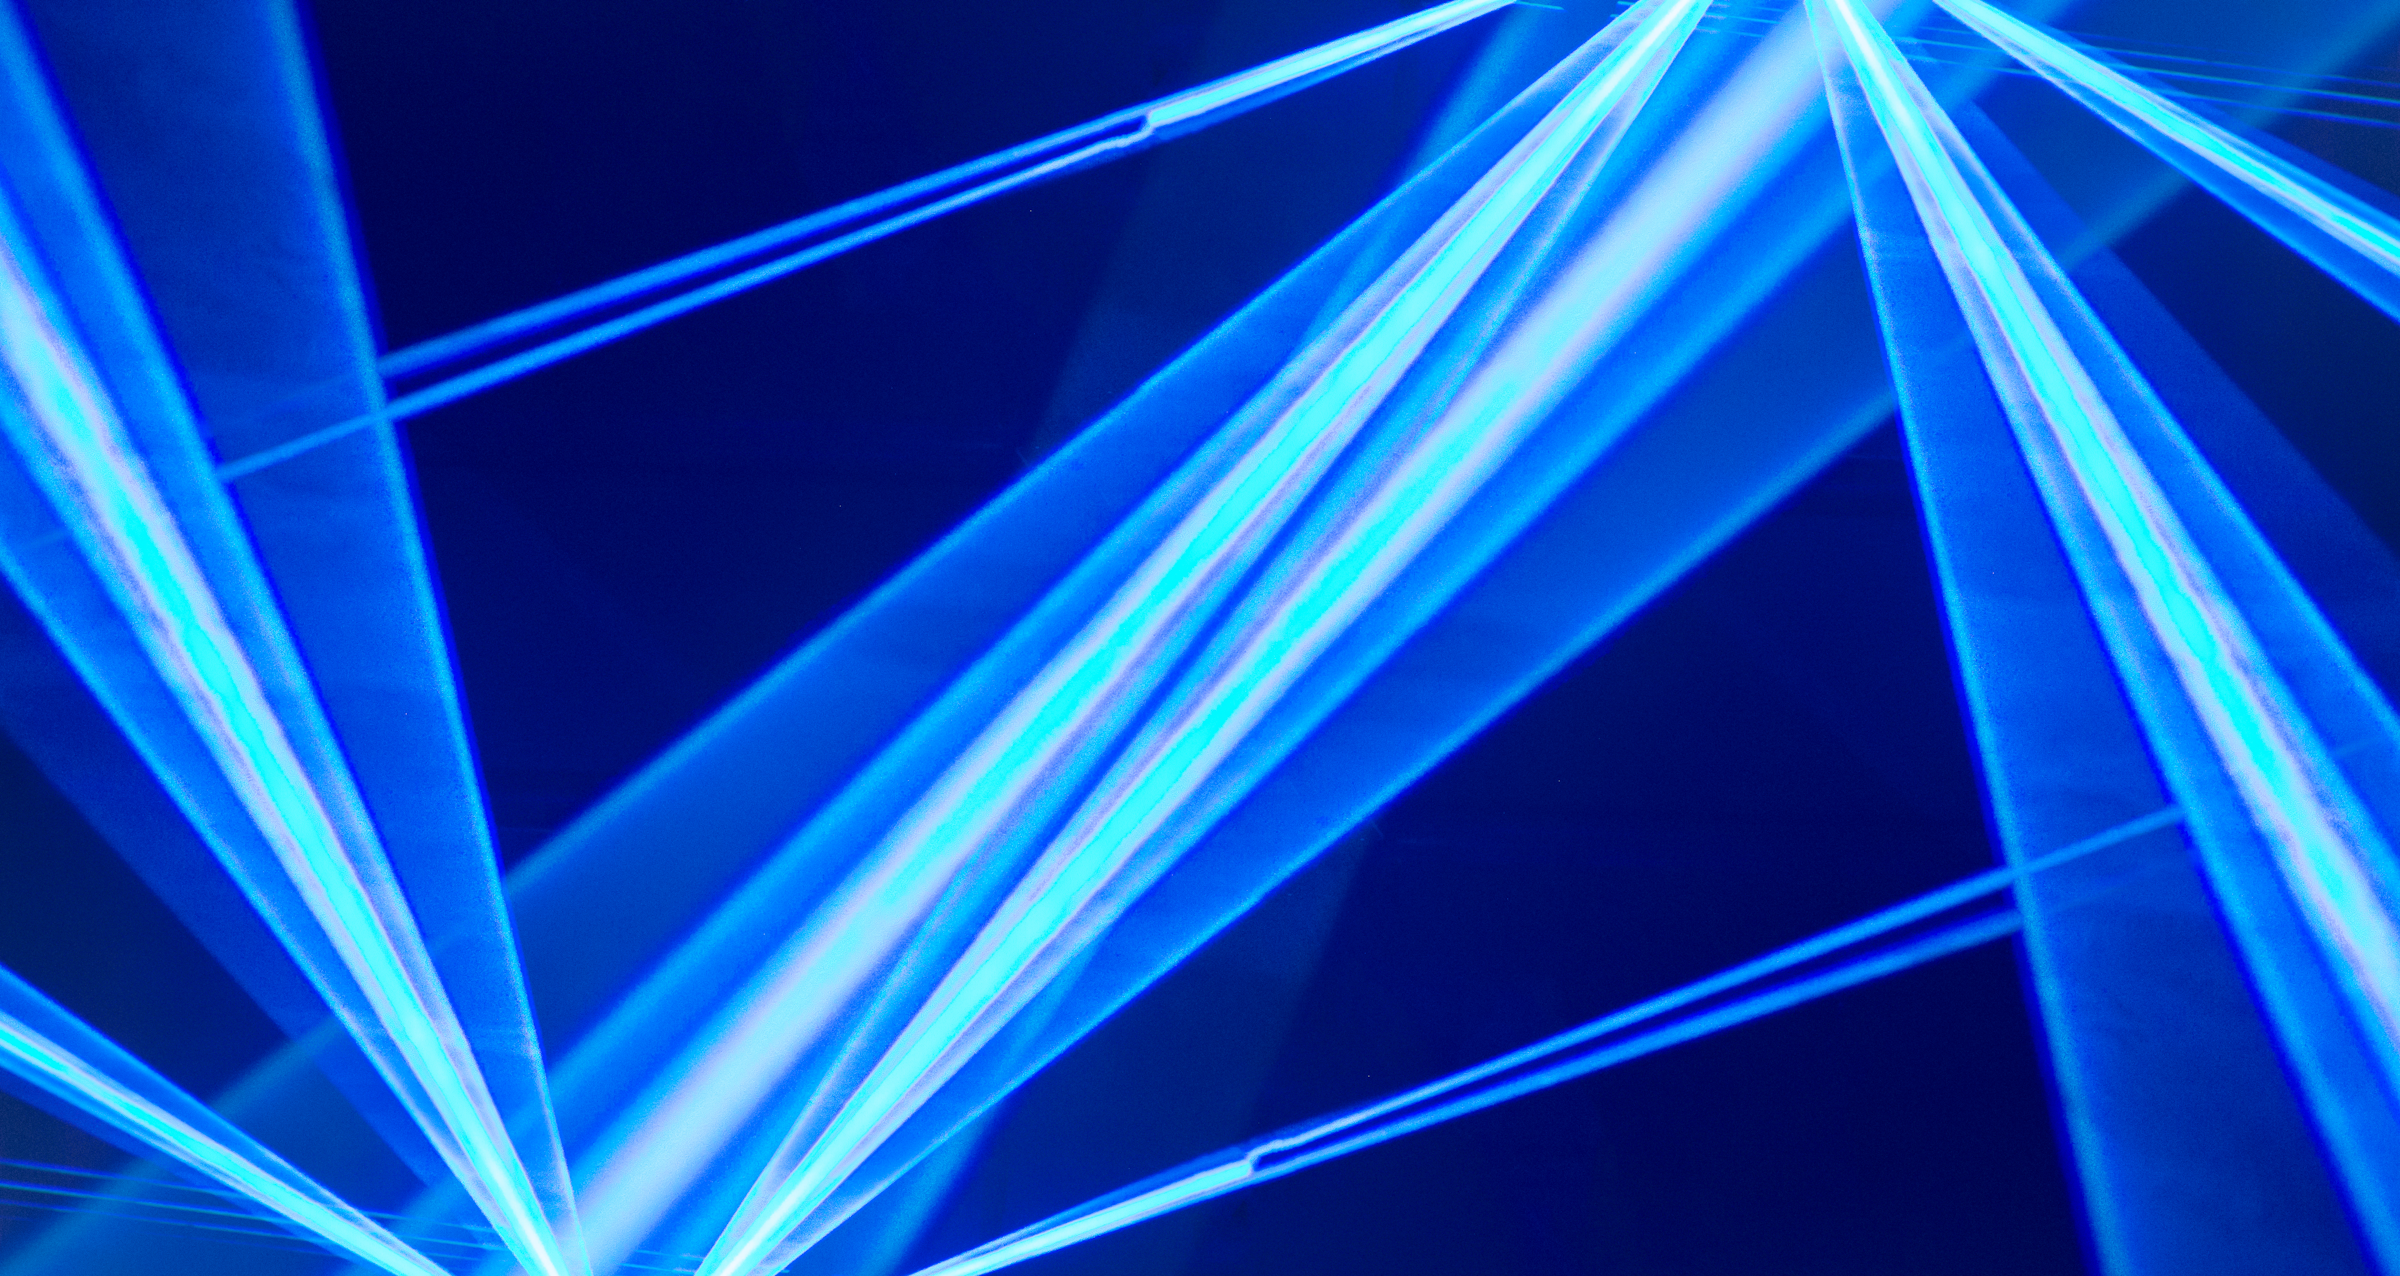 Artistic, geometric representation of lasers pointing in blue color